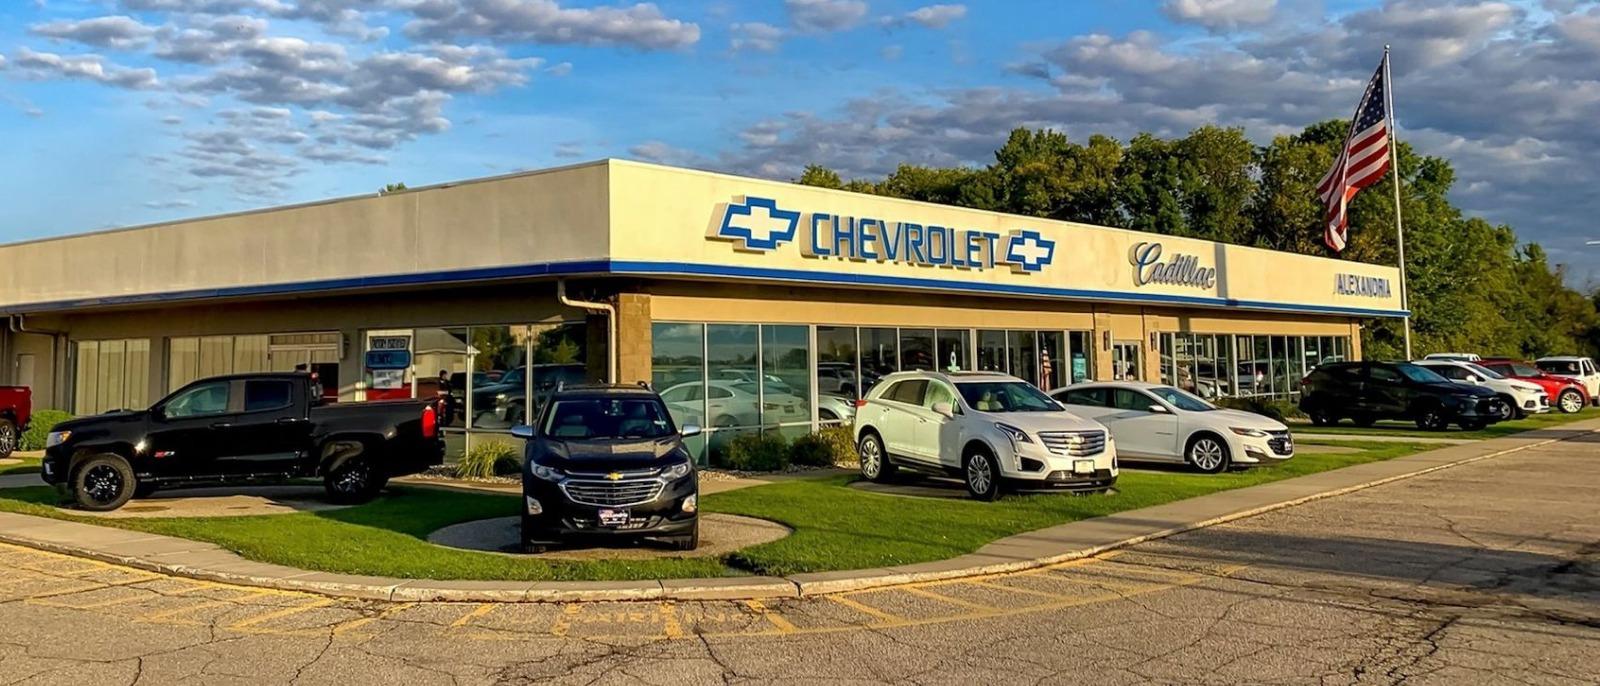 Alexandria Motors Is A Chevrolet Cadillac Mazda Dealer Selling New And Used Cars In Alexandria Mn